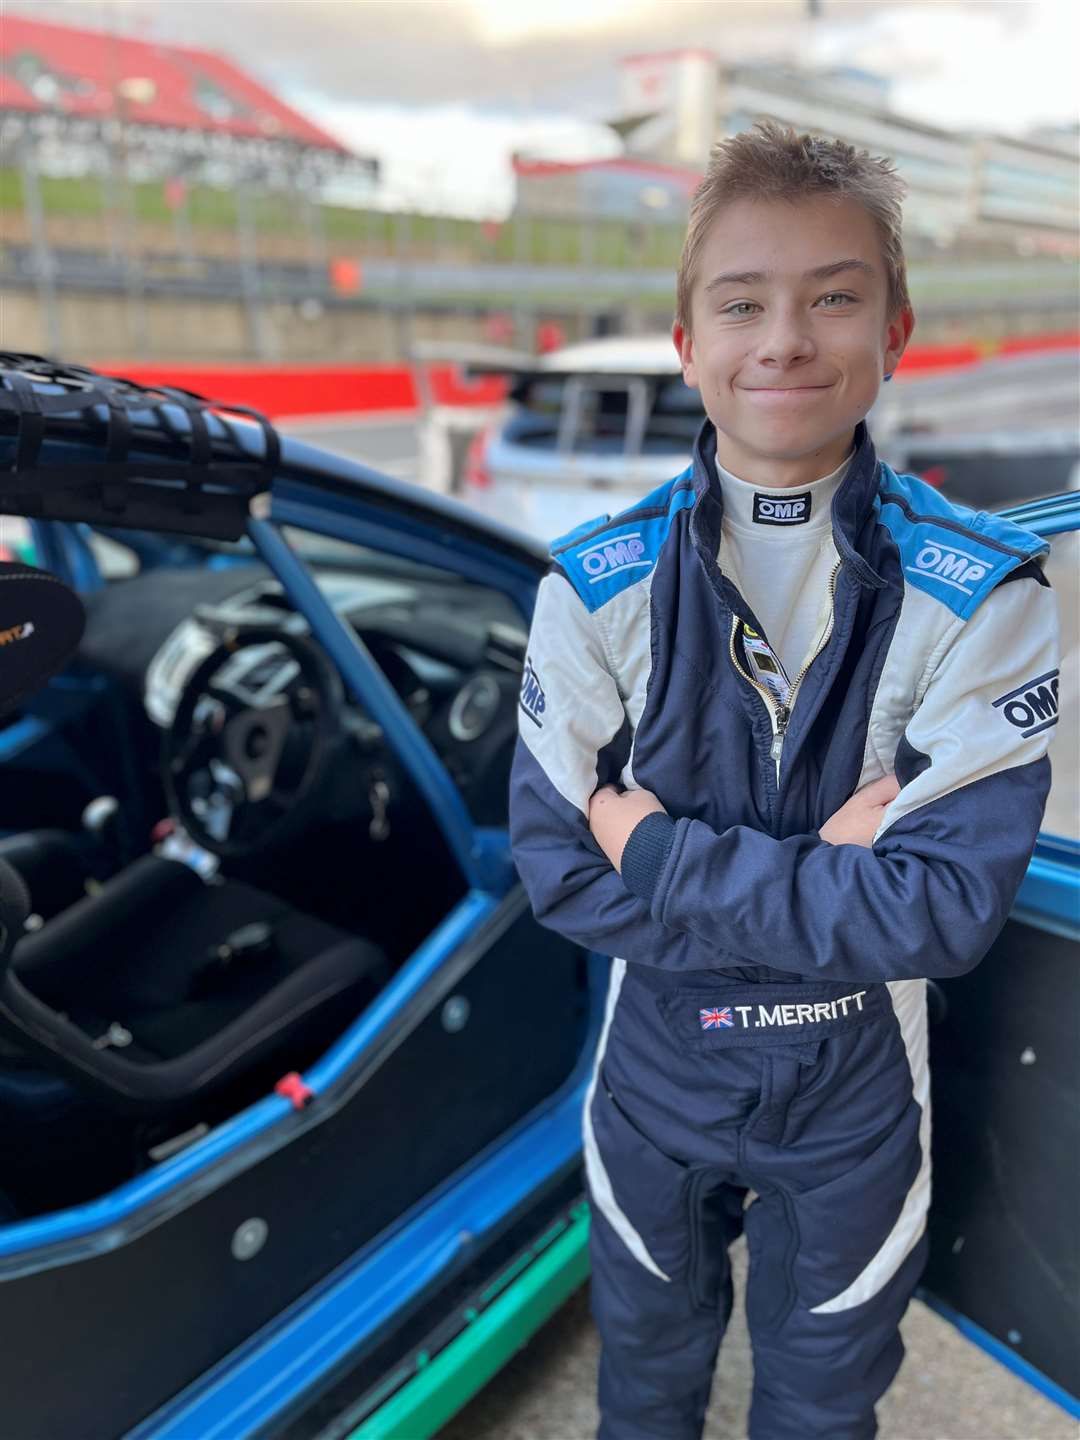 Kings Hill youngster Thomas Merritt has been testing at Brands Hatch